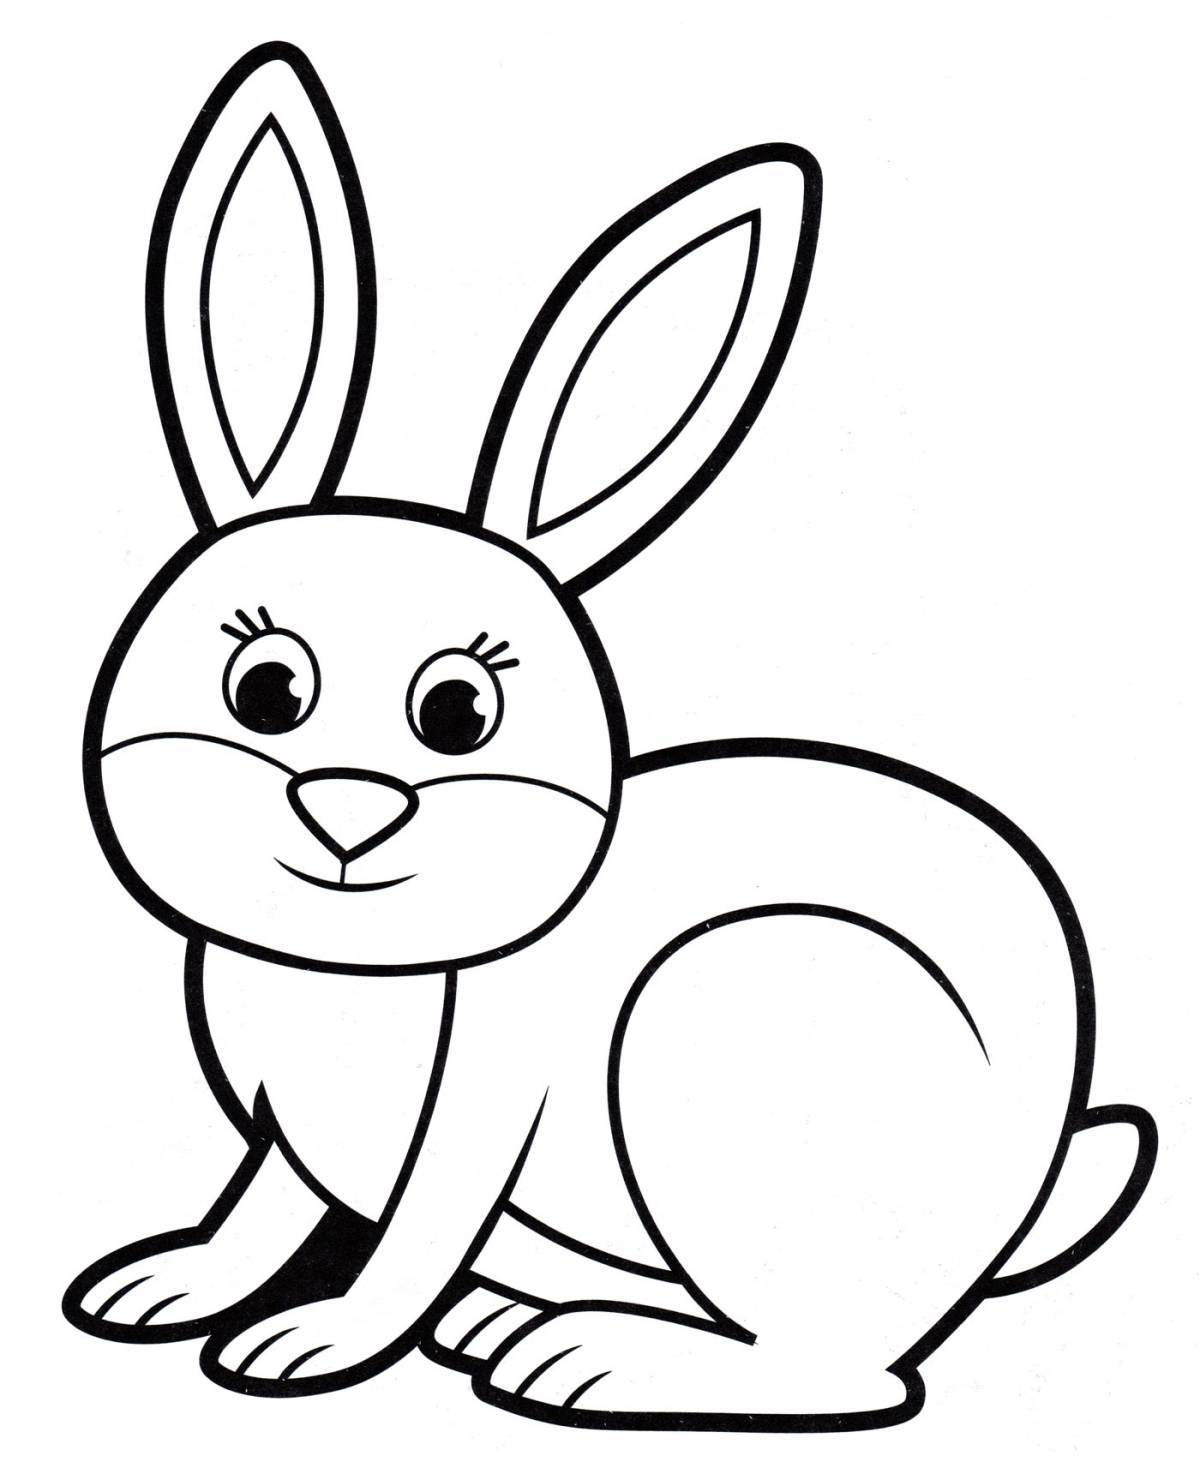 Radiant coloring page hare picture for kids